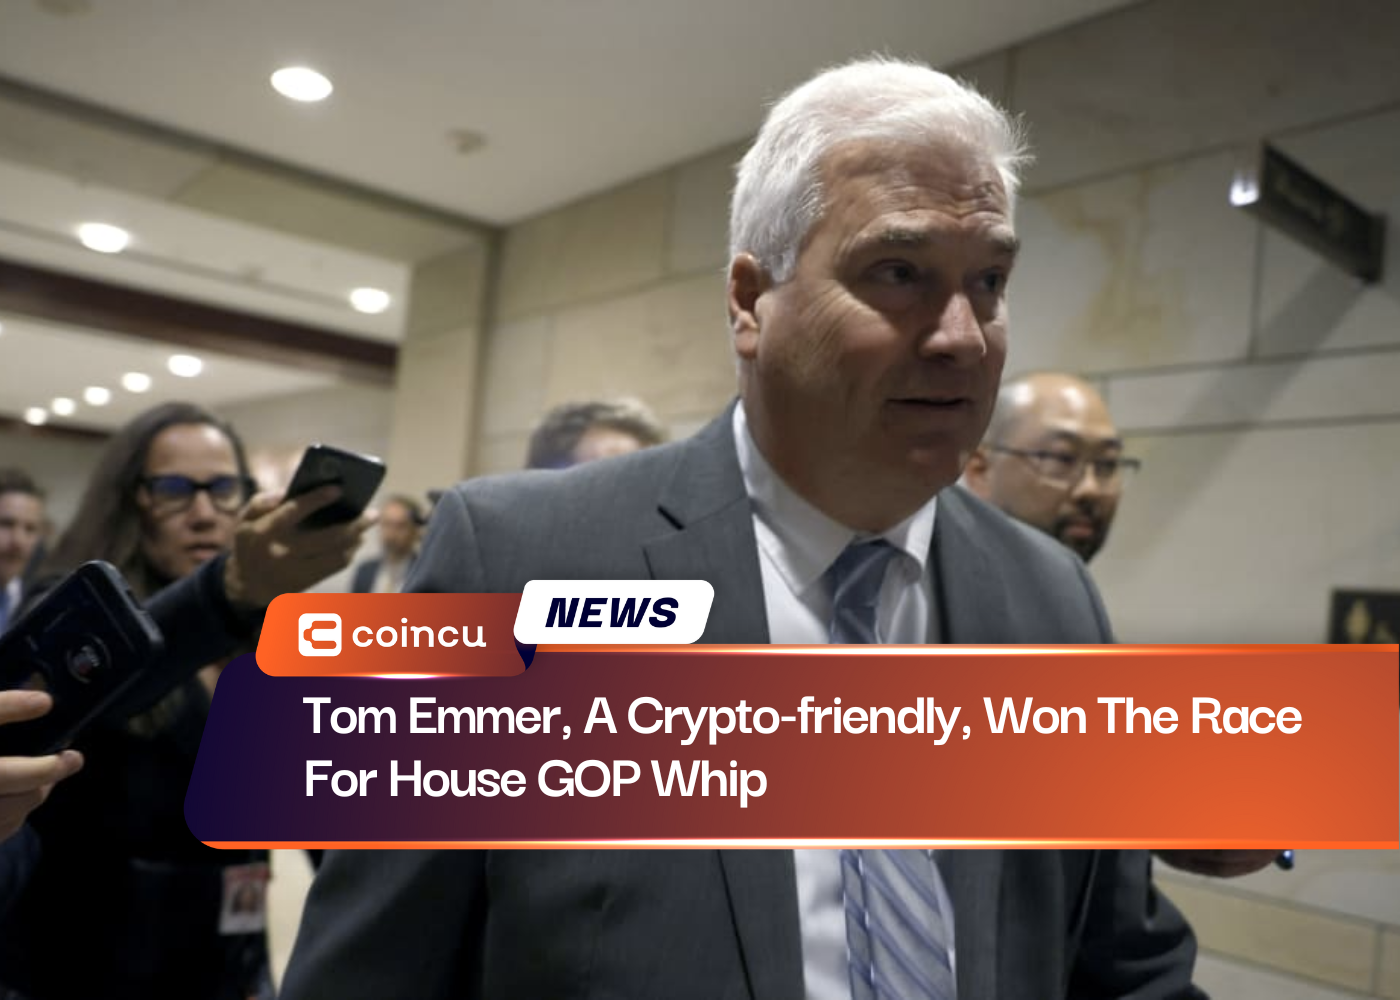 Tom Emmer, A Crypto-friendly, Won The Race For House GOP Whip